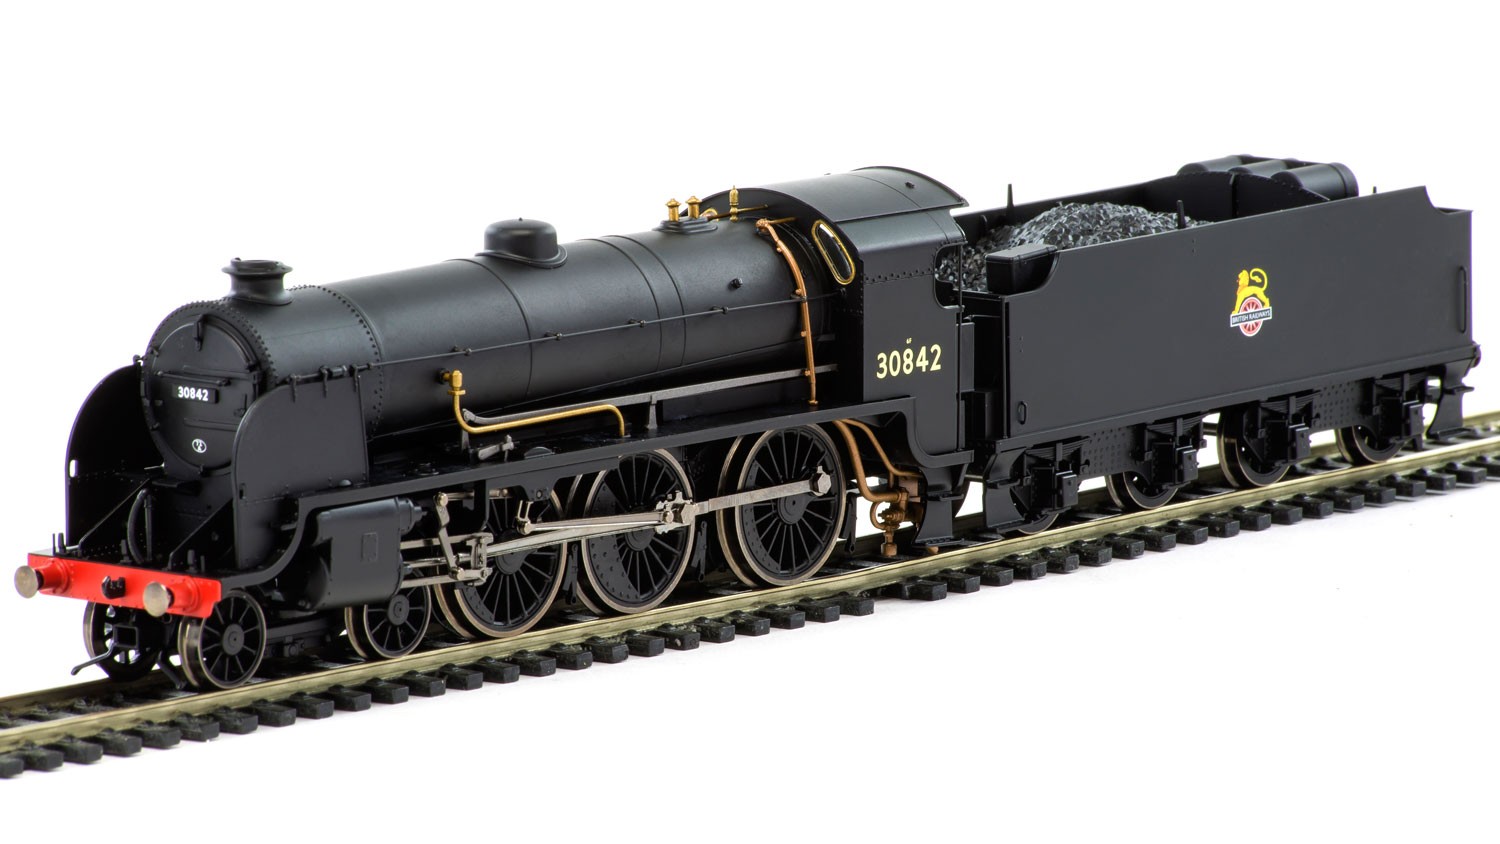 BR, Maunsell S15 Class, 4-6-0, 30842, Early BR - Era 4